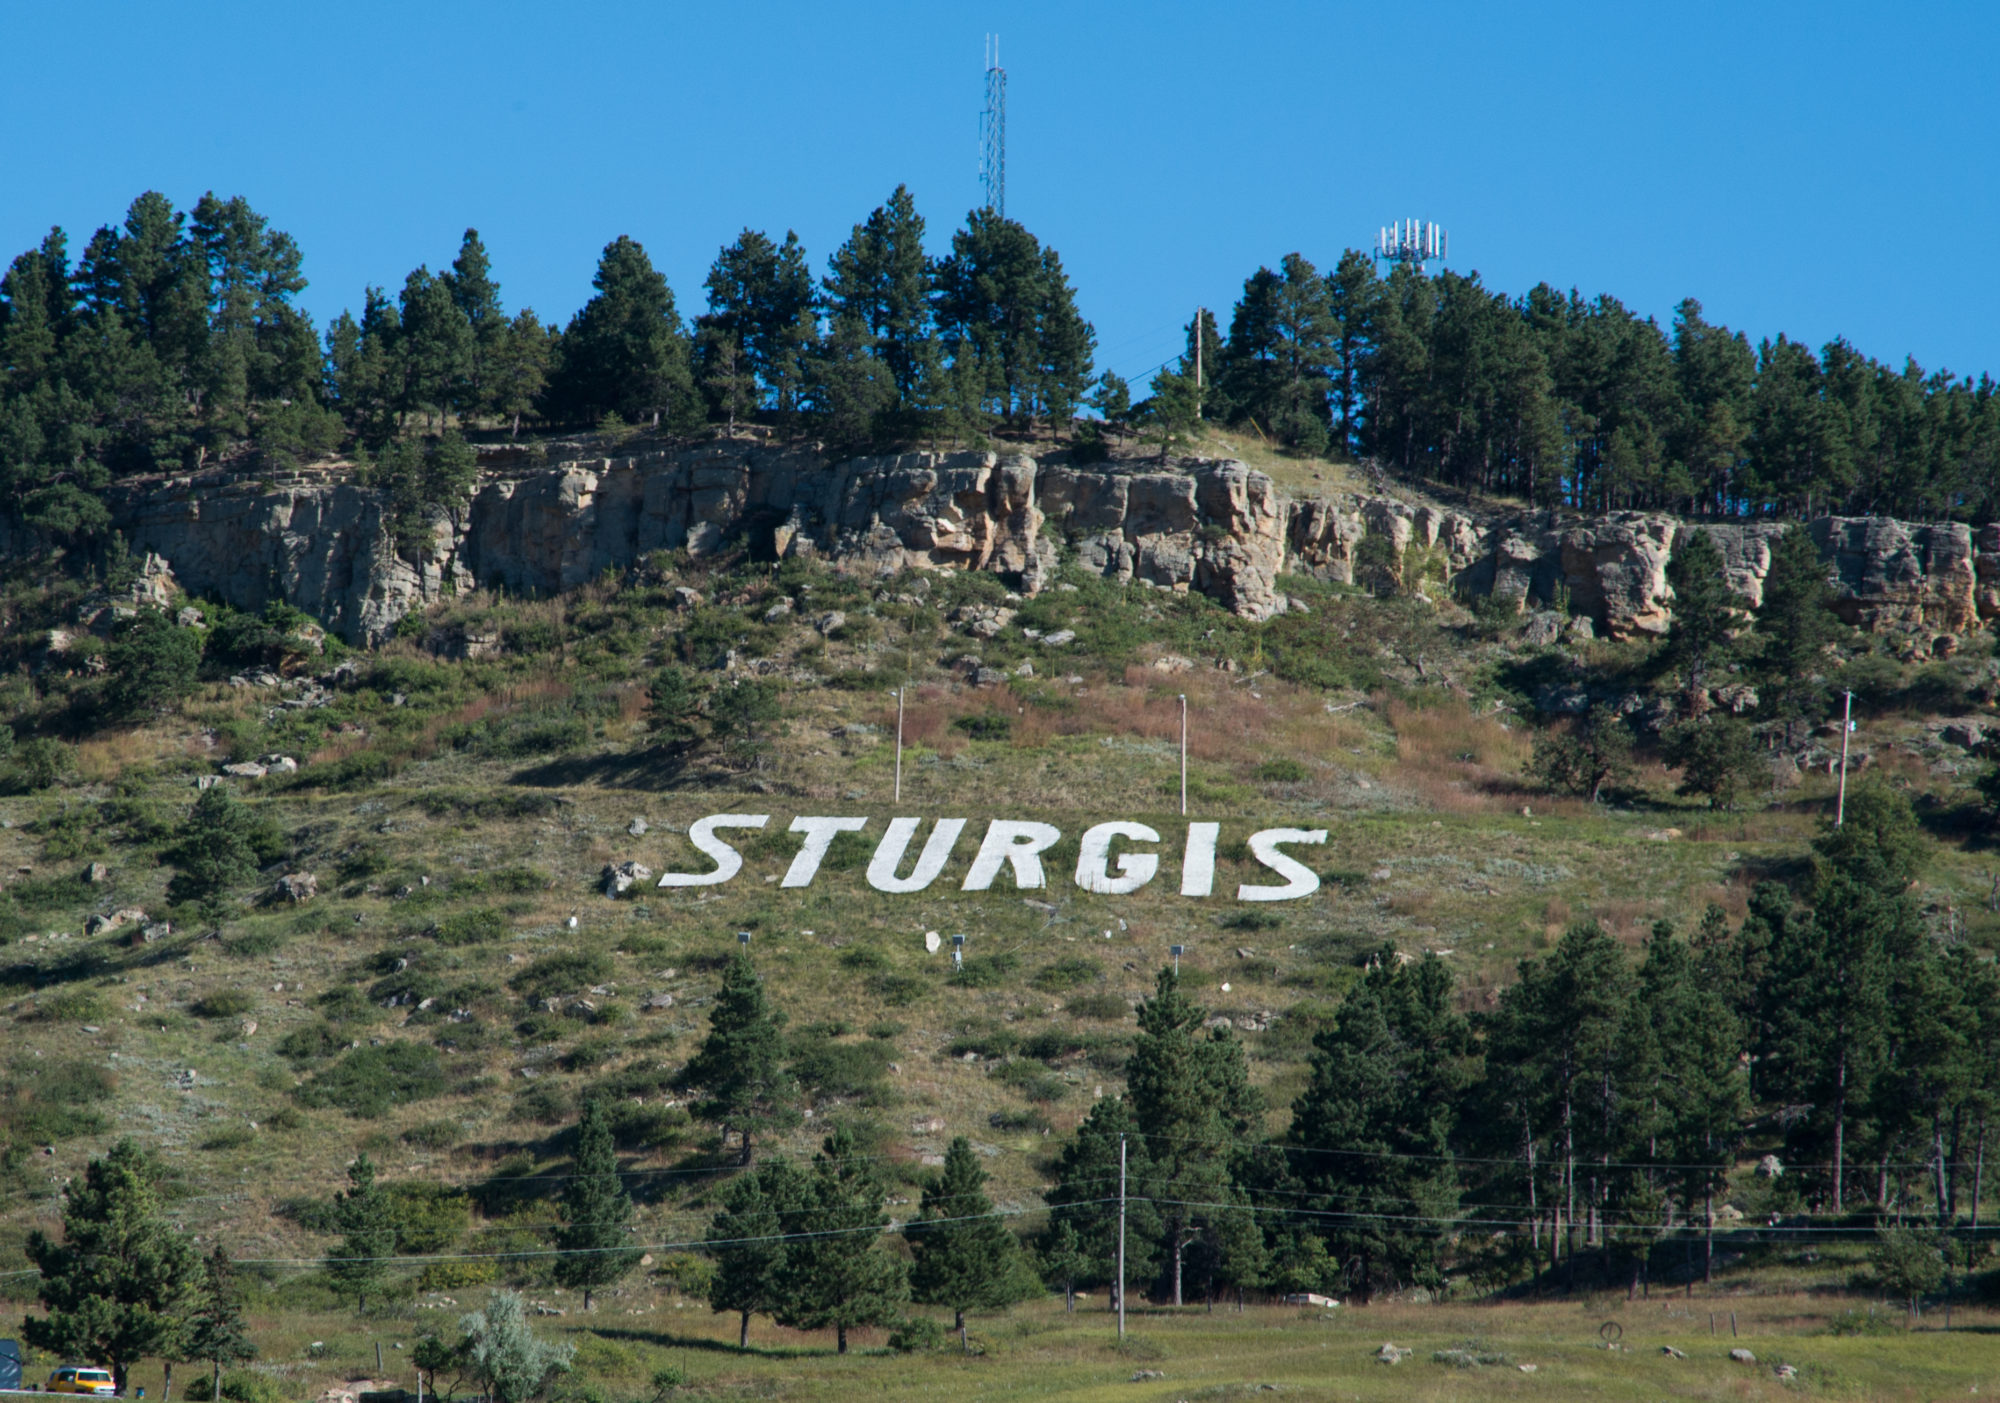 Sturgis sign on Sly Hill north of downtown Sturgis, South Dakota